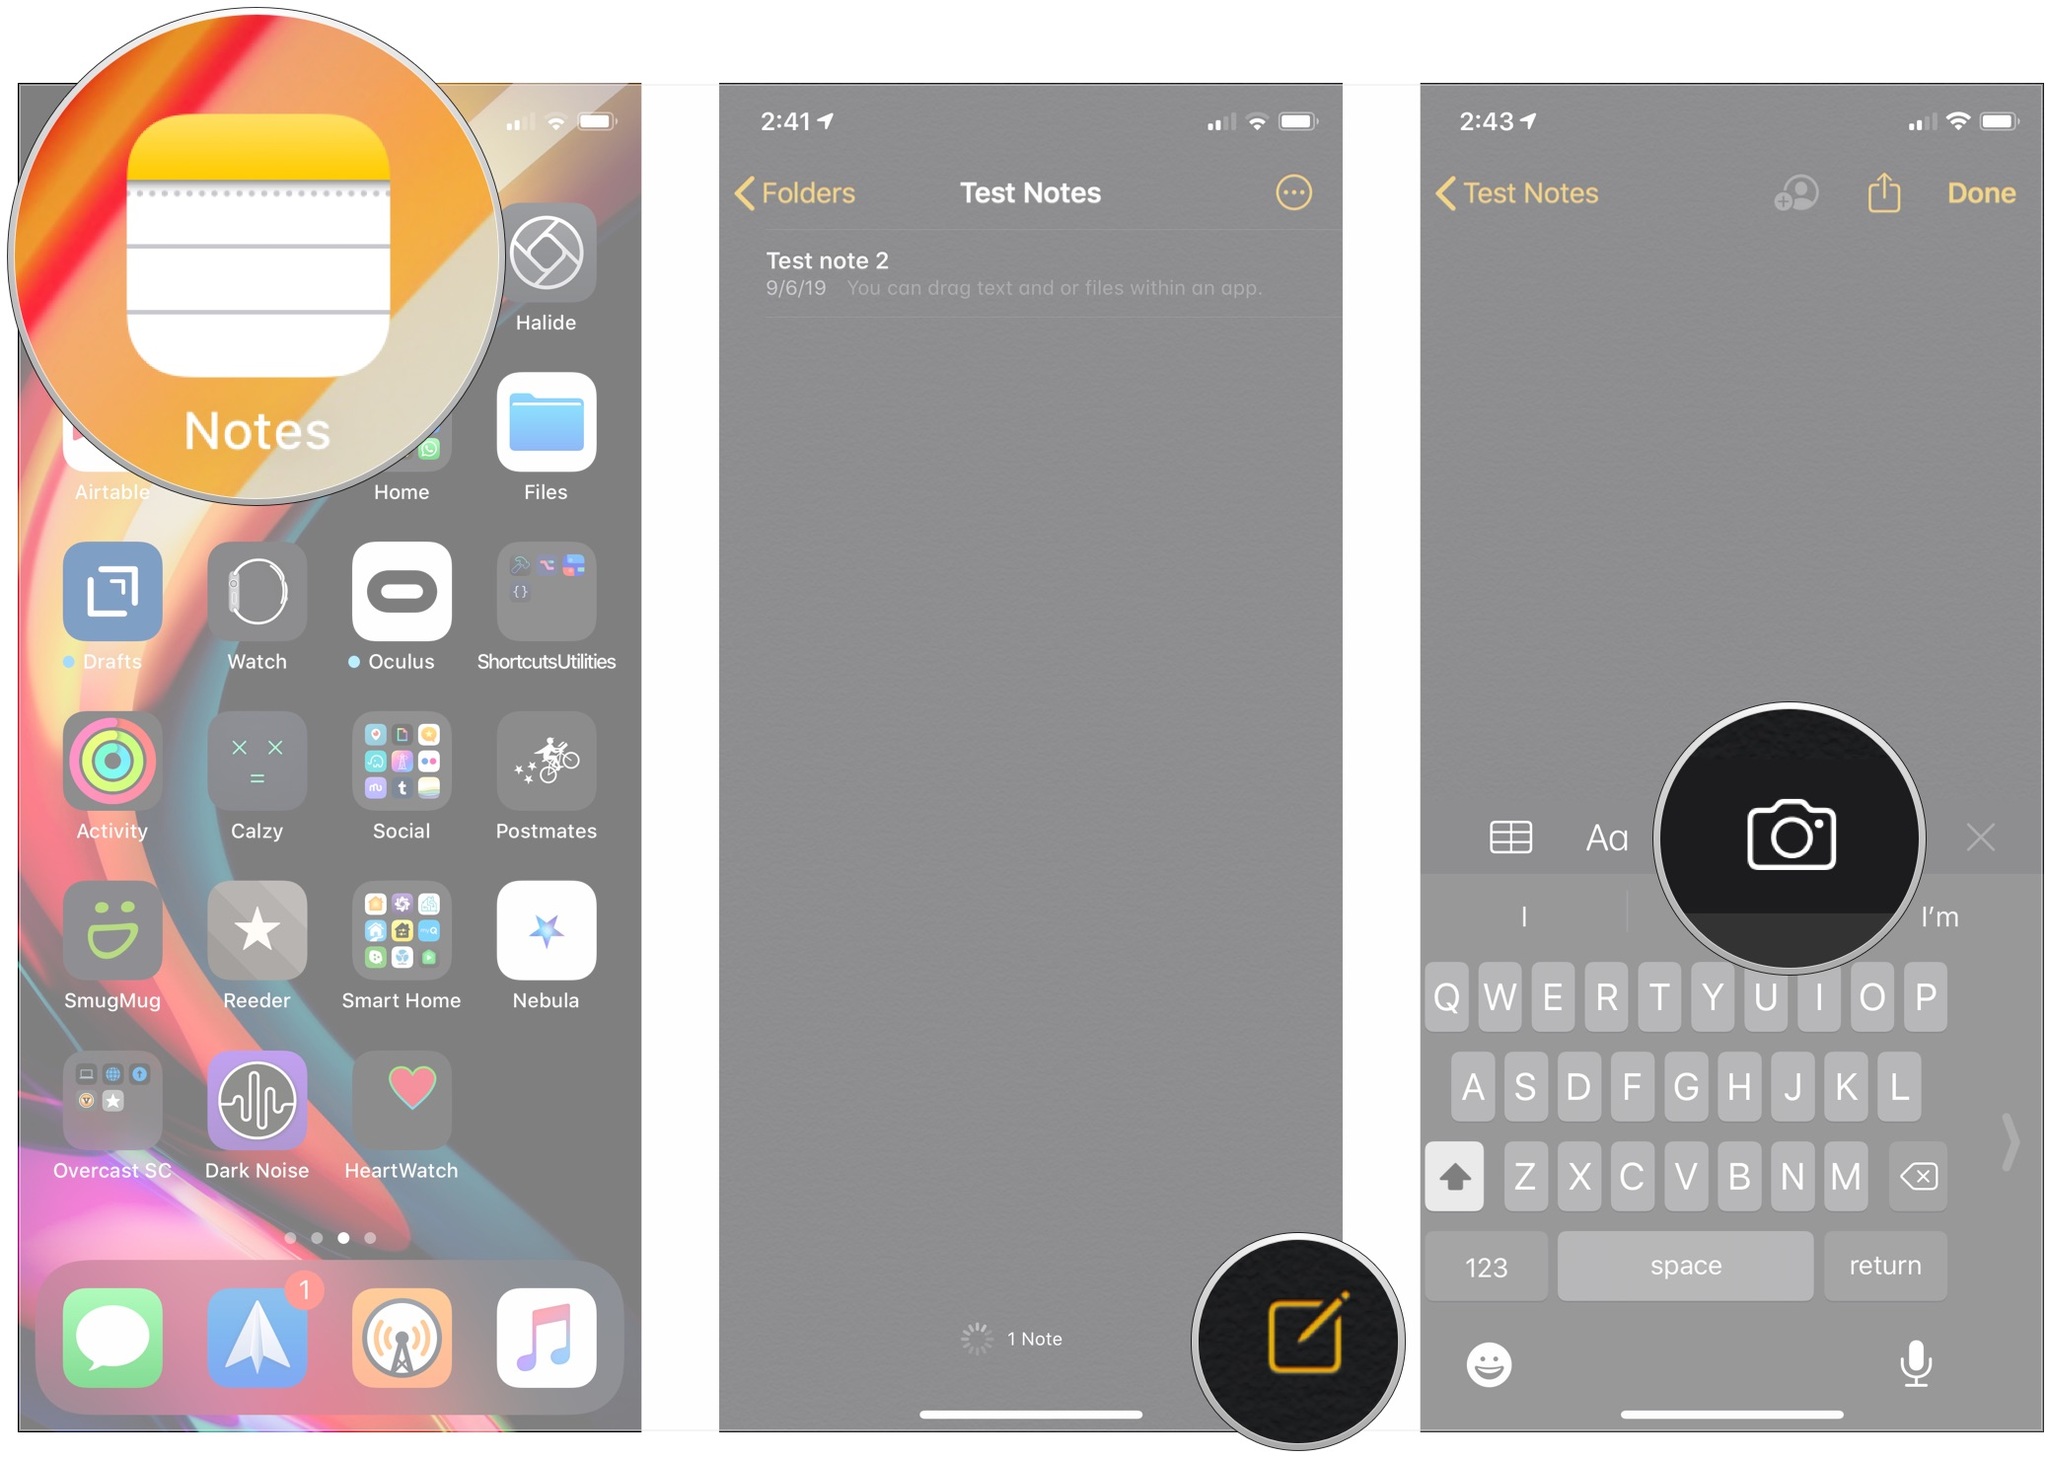 Open Notes, create new note, tap camera button